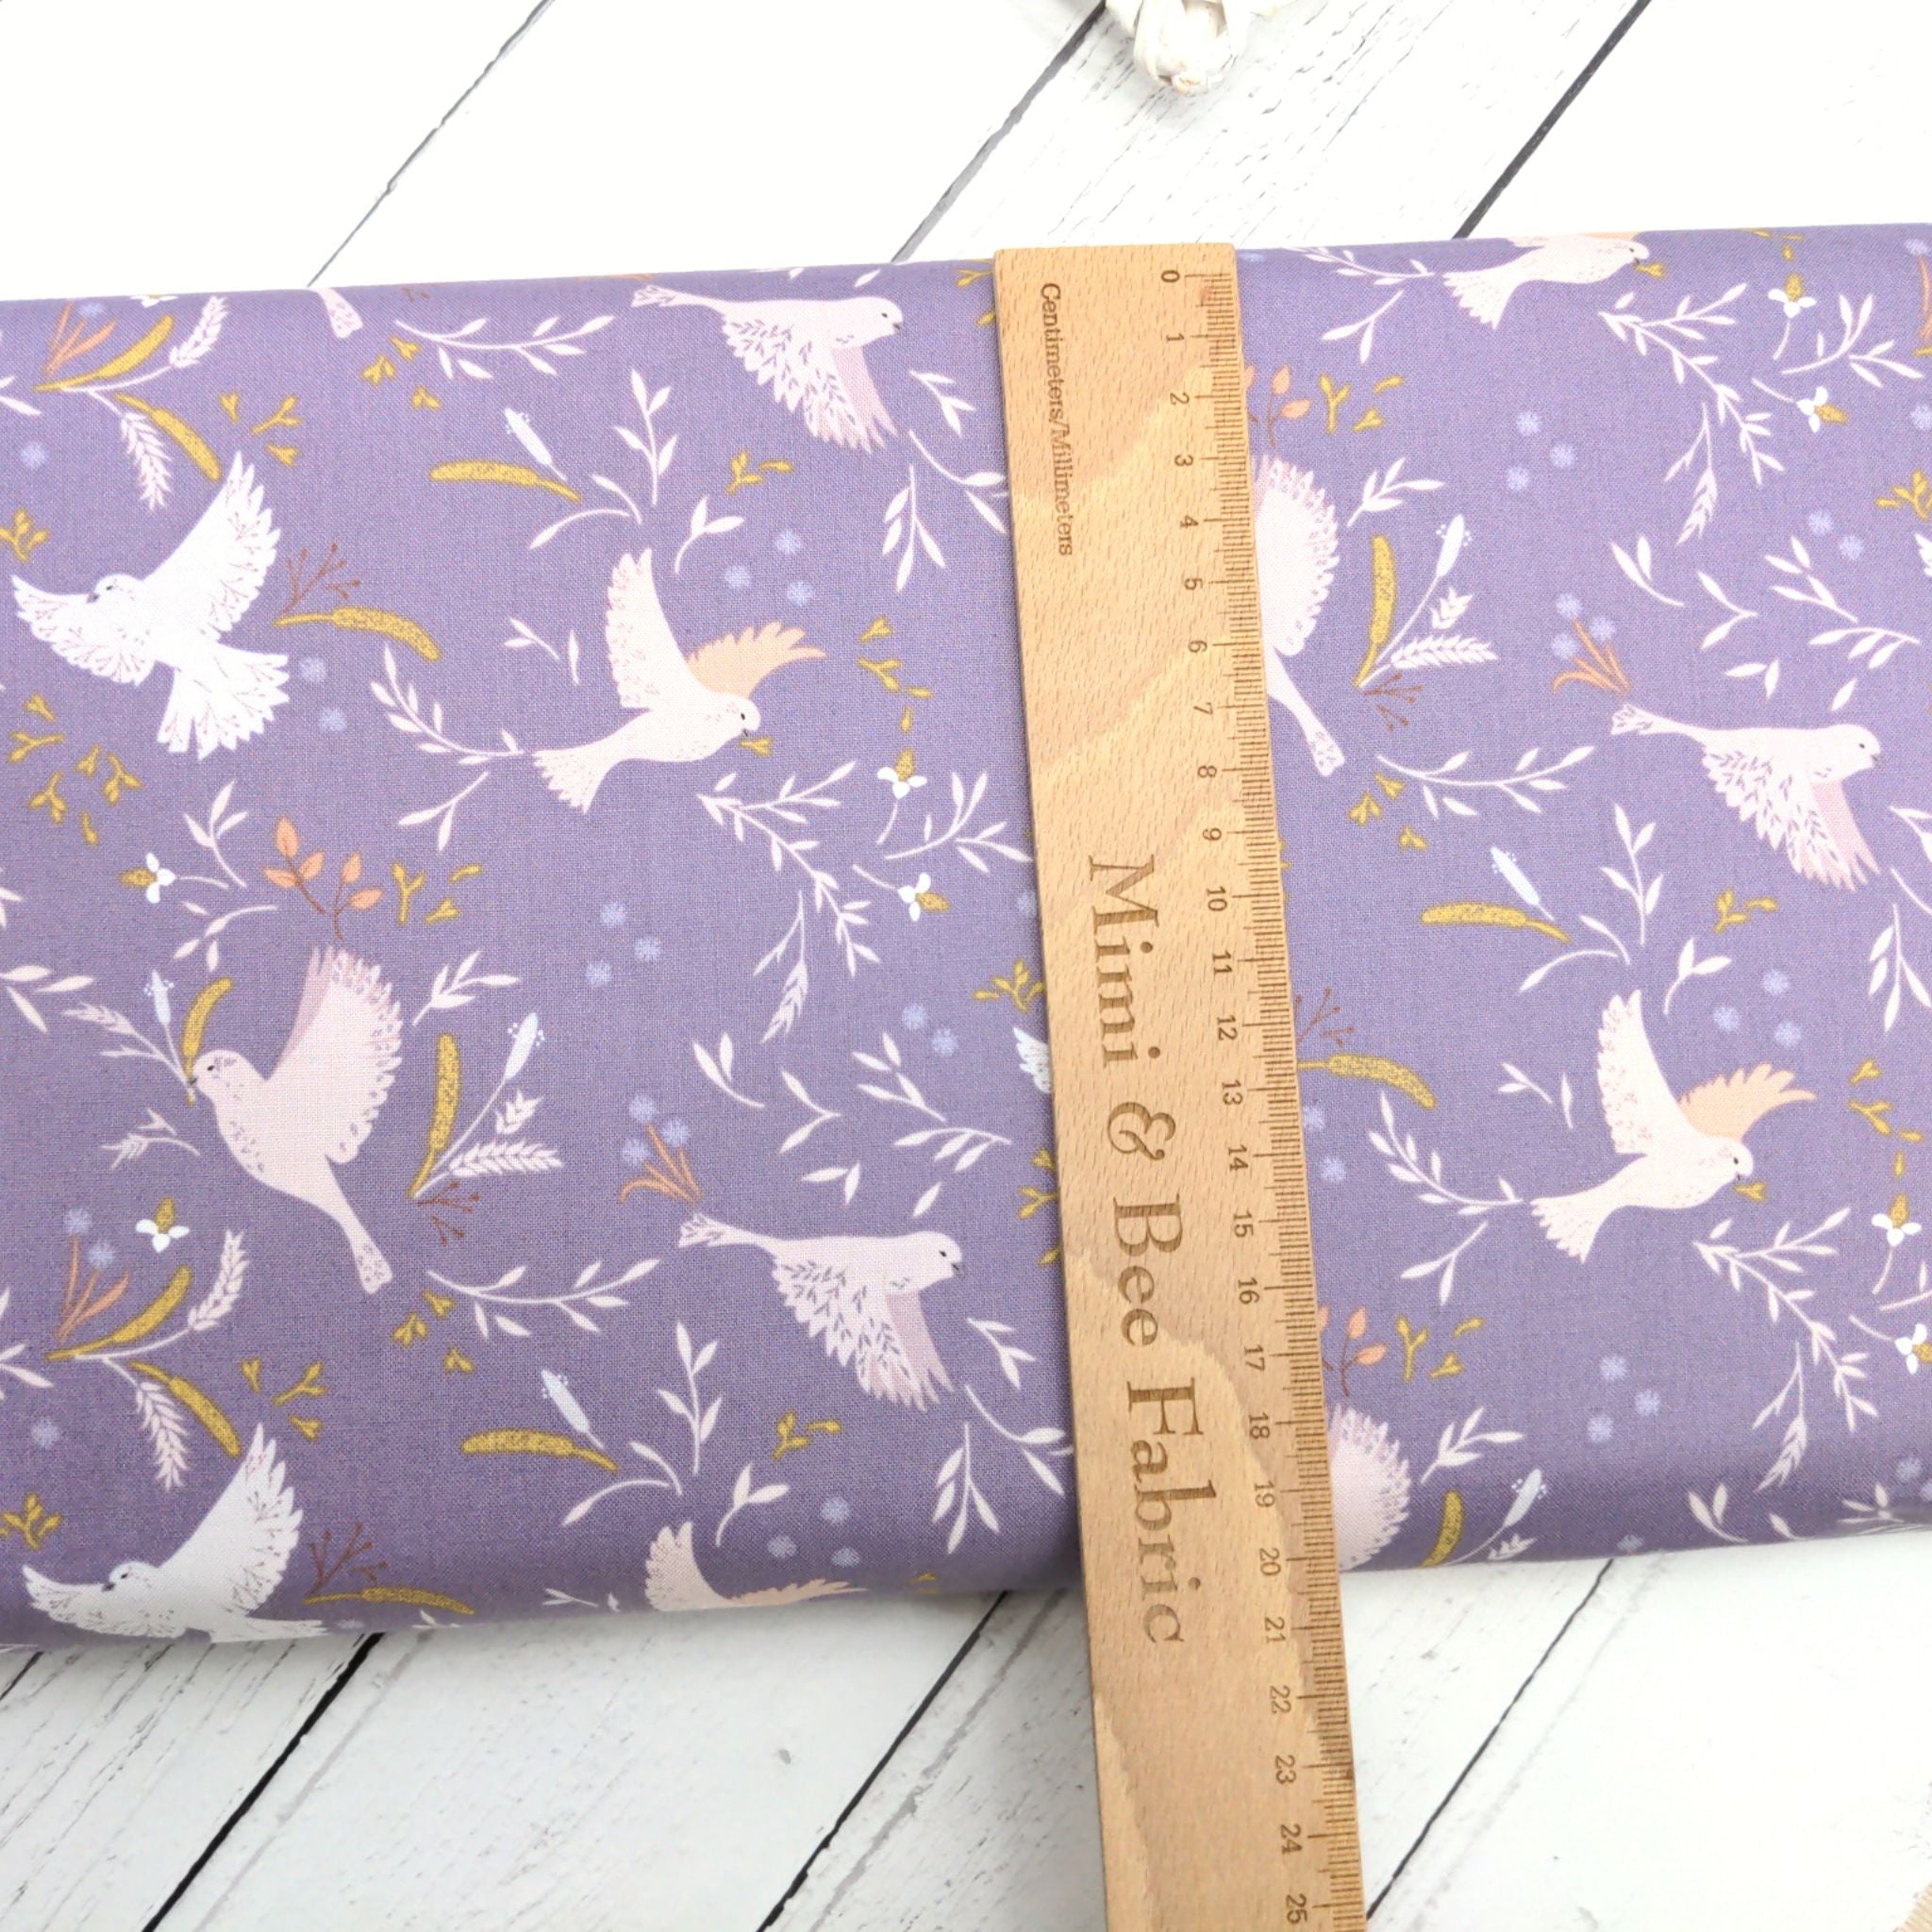 Birds on Purple Lavender cotton fabric - Meadowside by Lewis & Irene